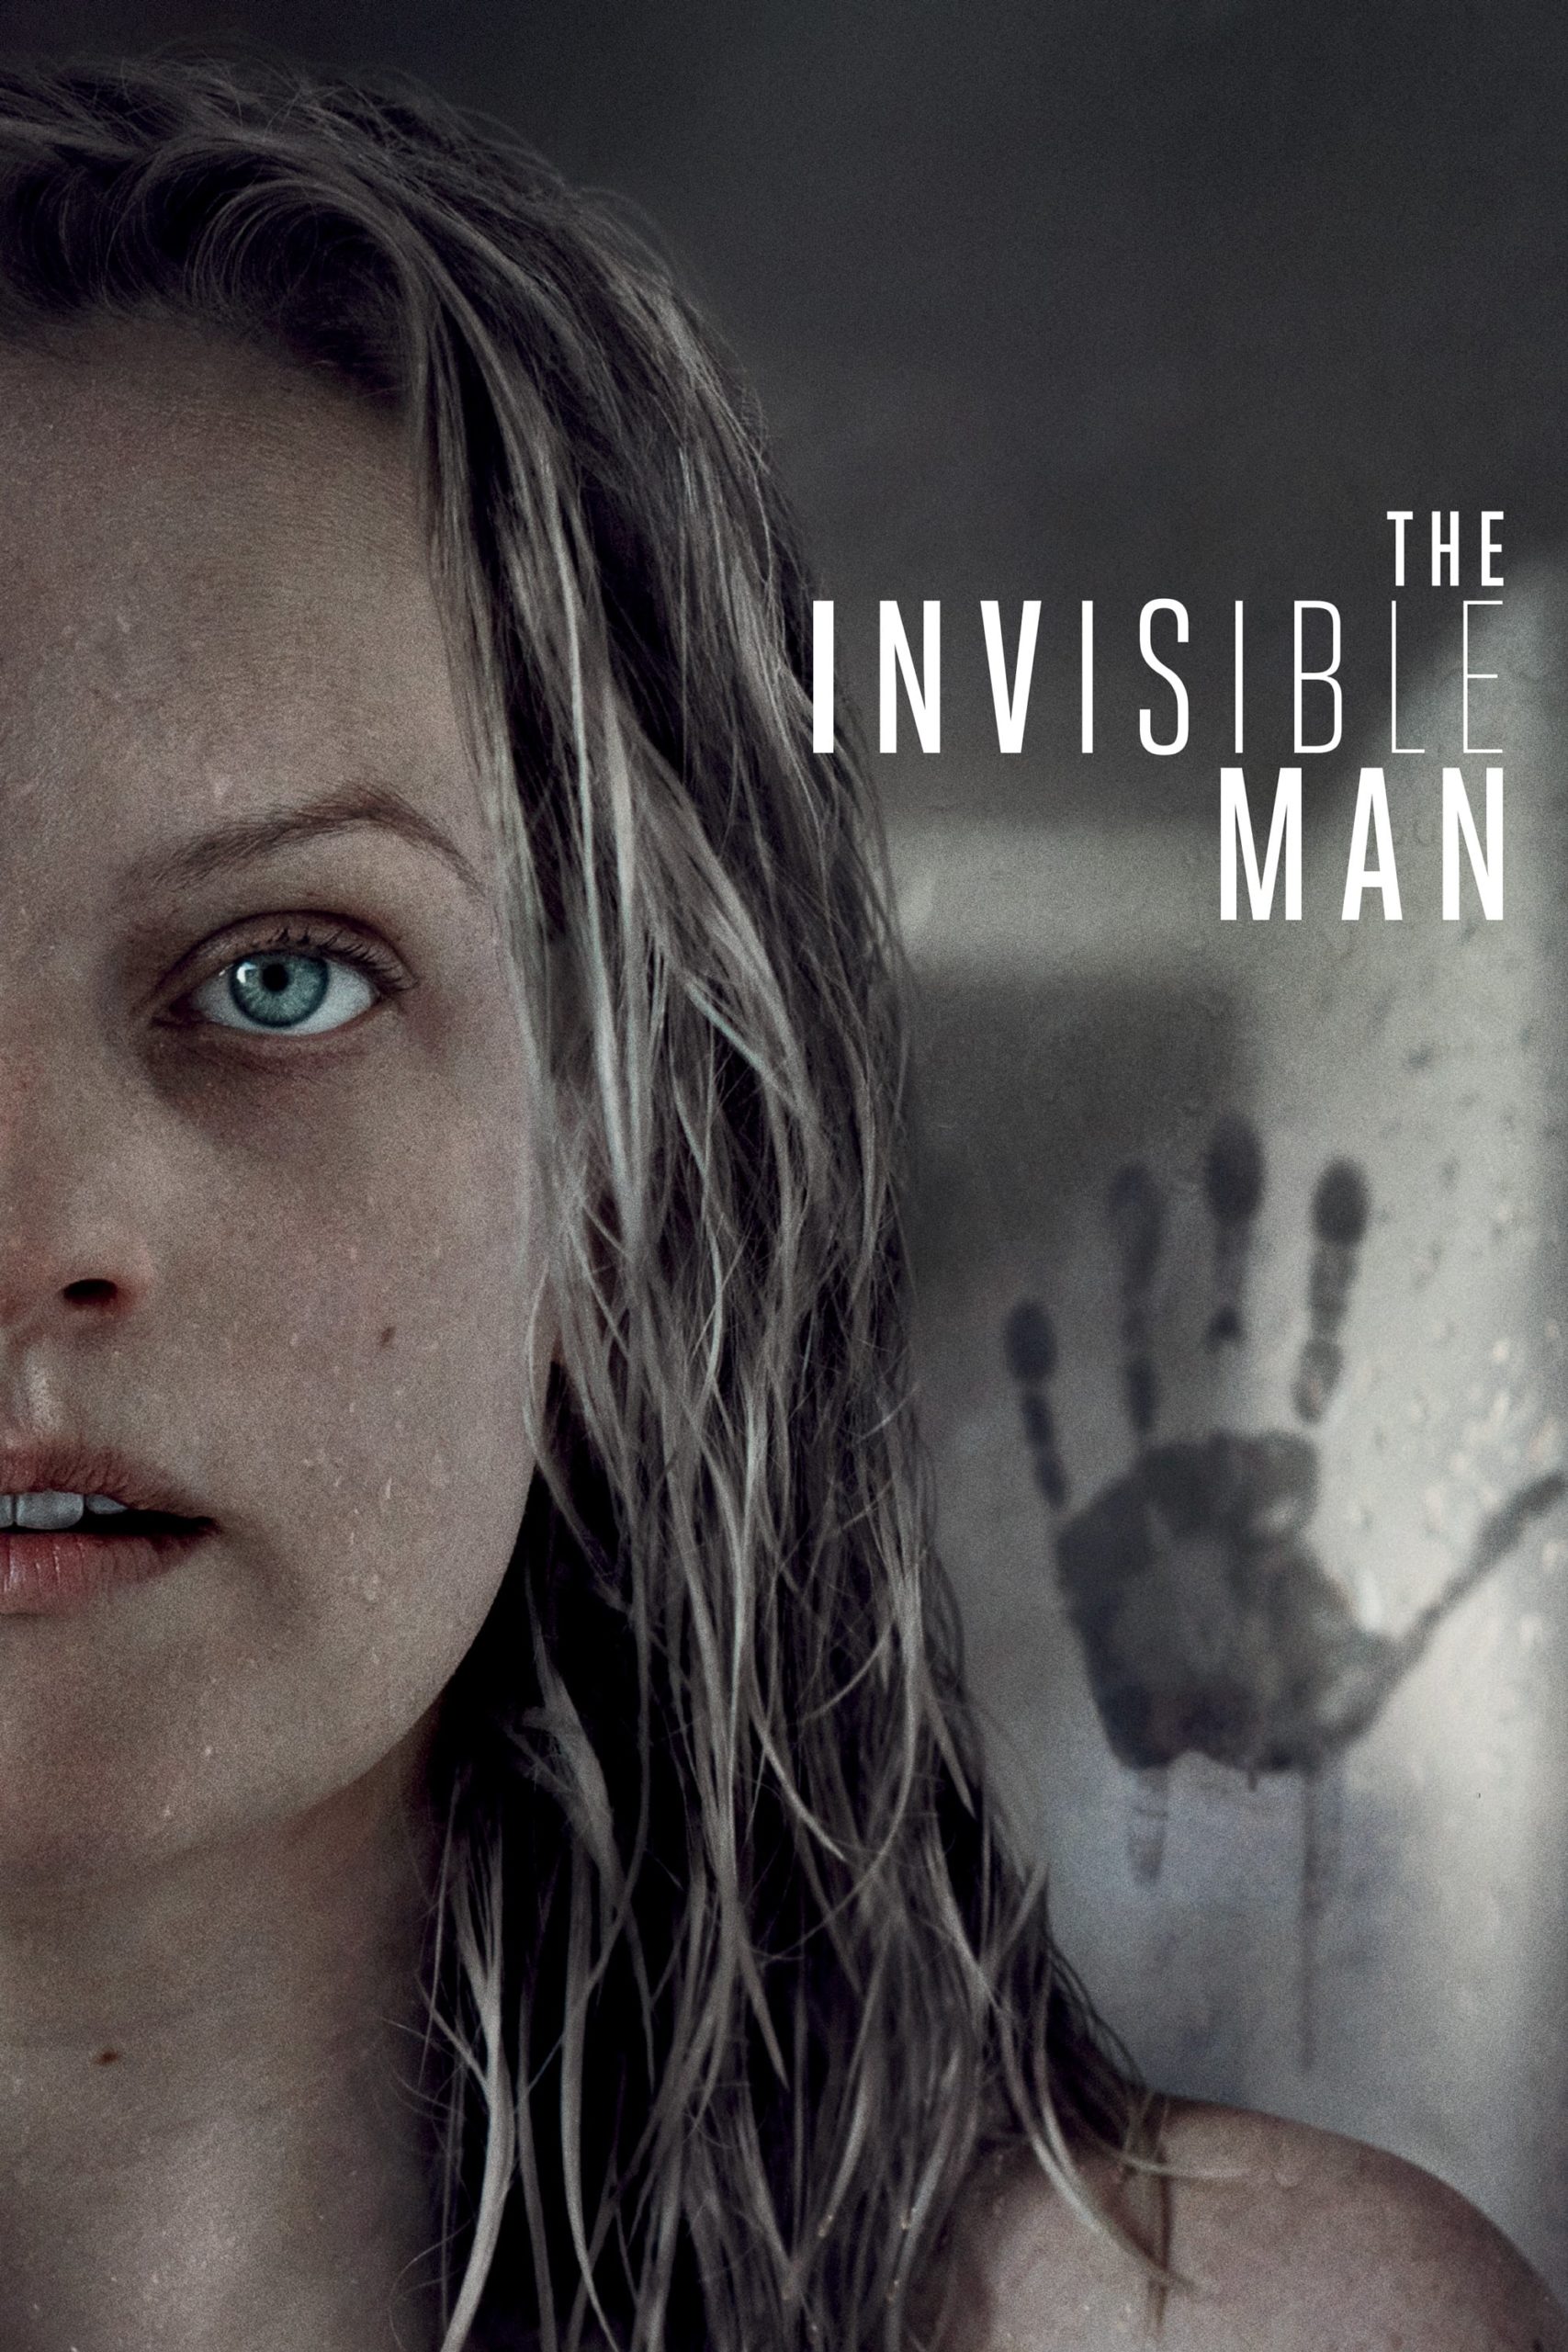 Poster for the movie "The Invisible Man"